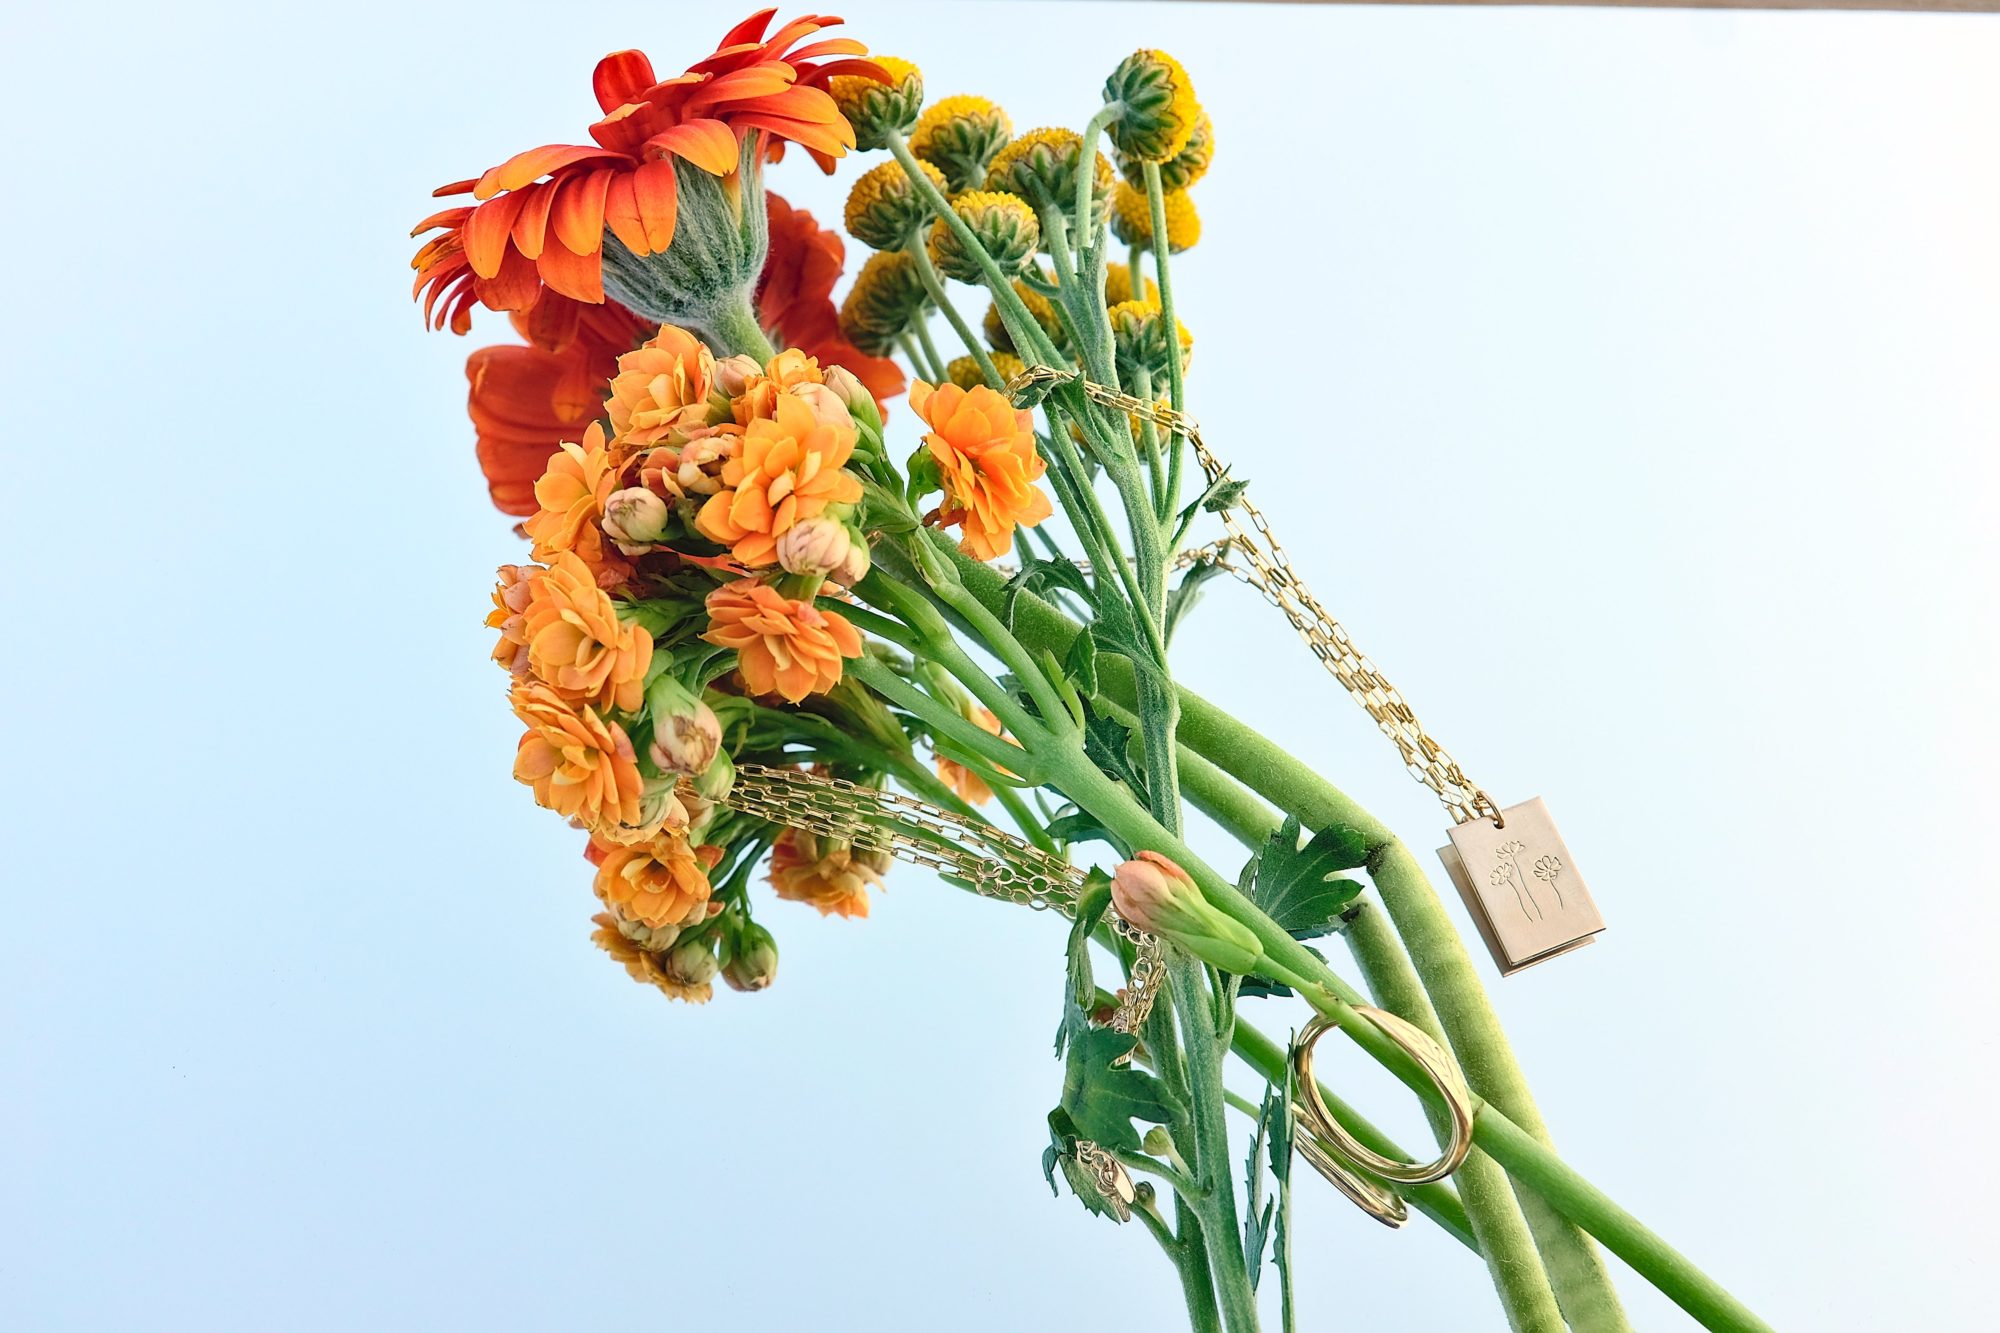 GLDN's Marseille necklace and olive signet ring are mixed in with a bouquet of flowers